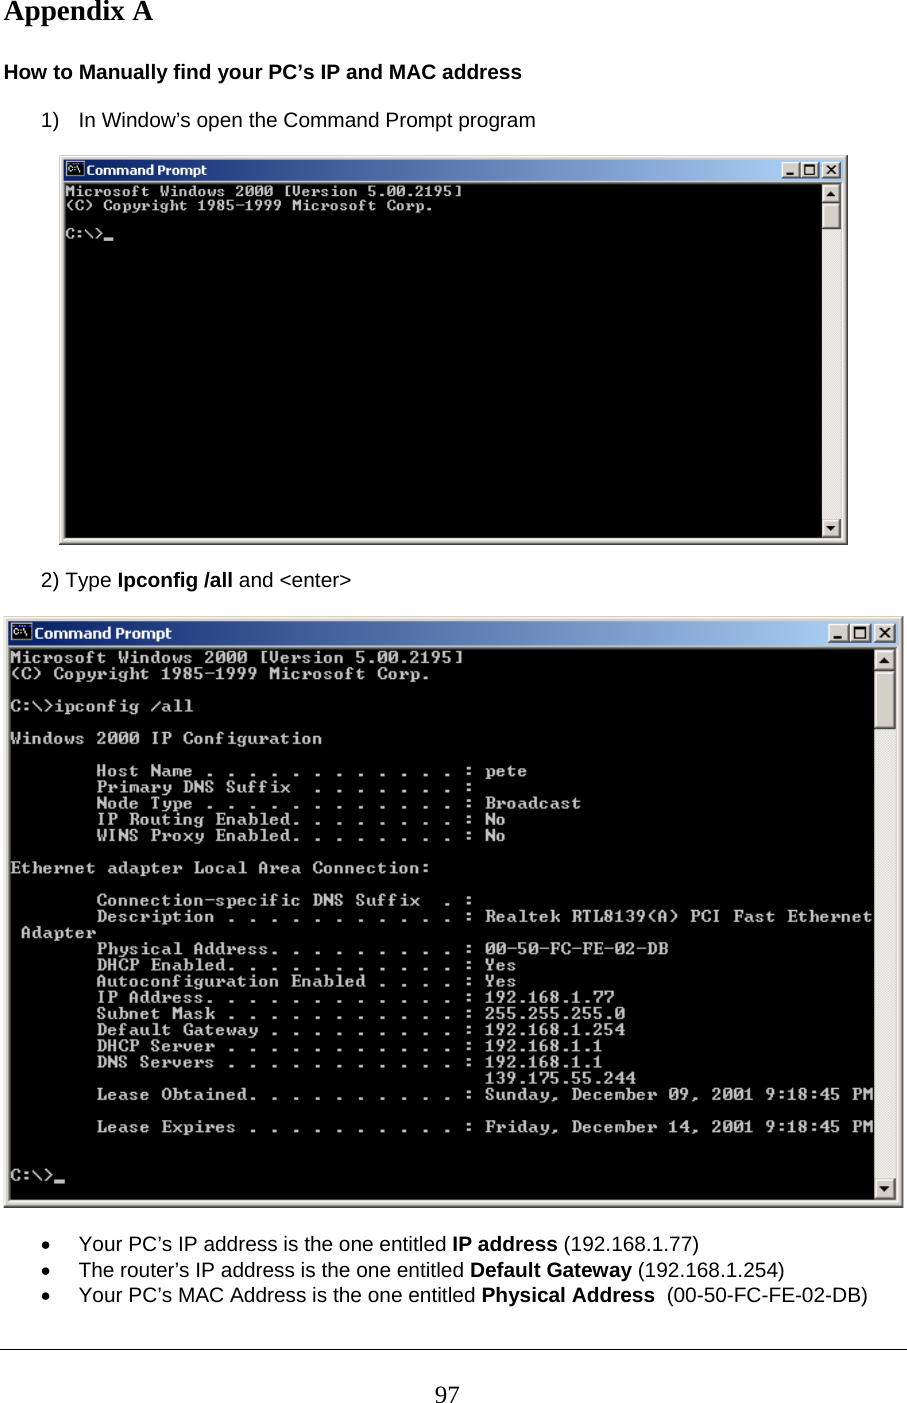 Appendix A   How to Manually find your PC’s IP and MAC address  1)  In Window’s open the Command Prompt program      2) Type Ipconfig /all and &lt;enter&gt;     •  Your PC’s IP address is the one entitled IP address (192.168.1.77) •  The router’s IP address is the one entitled Default Gateway (192.168.1.254) •  Your PC’s MAC Address is the one entitled Physical Address  (00-50-FC-FE-02-DB)  97